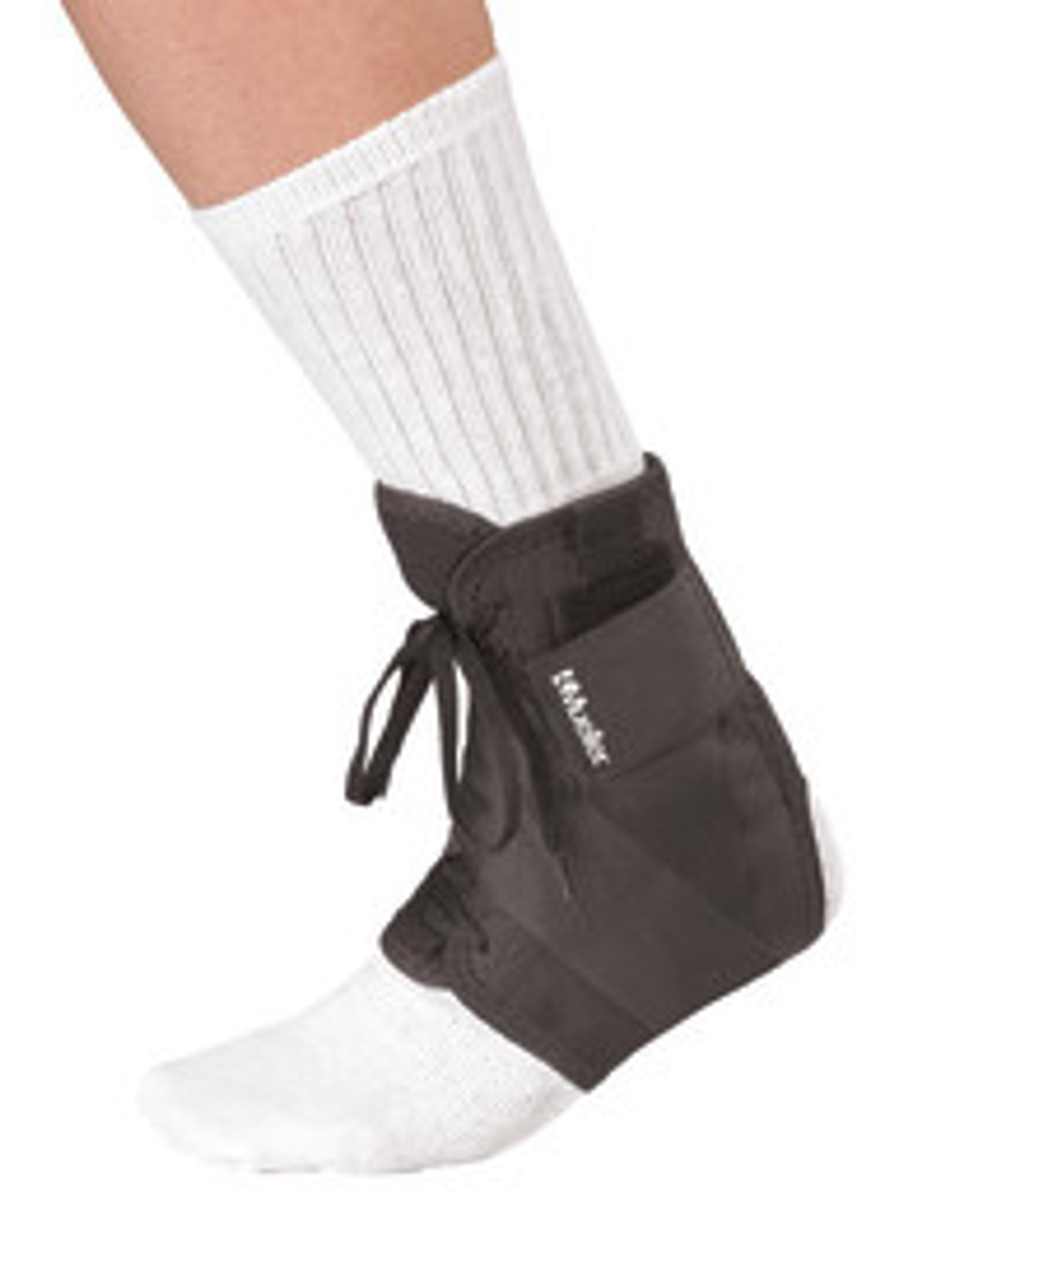 Mueller 41771 Soft Ankle Brace with straps, Black, Small